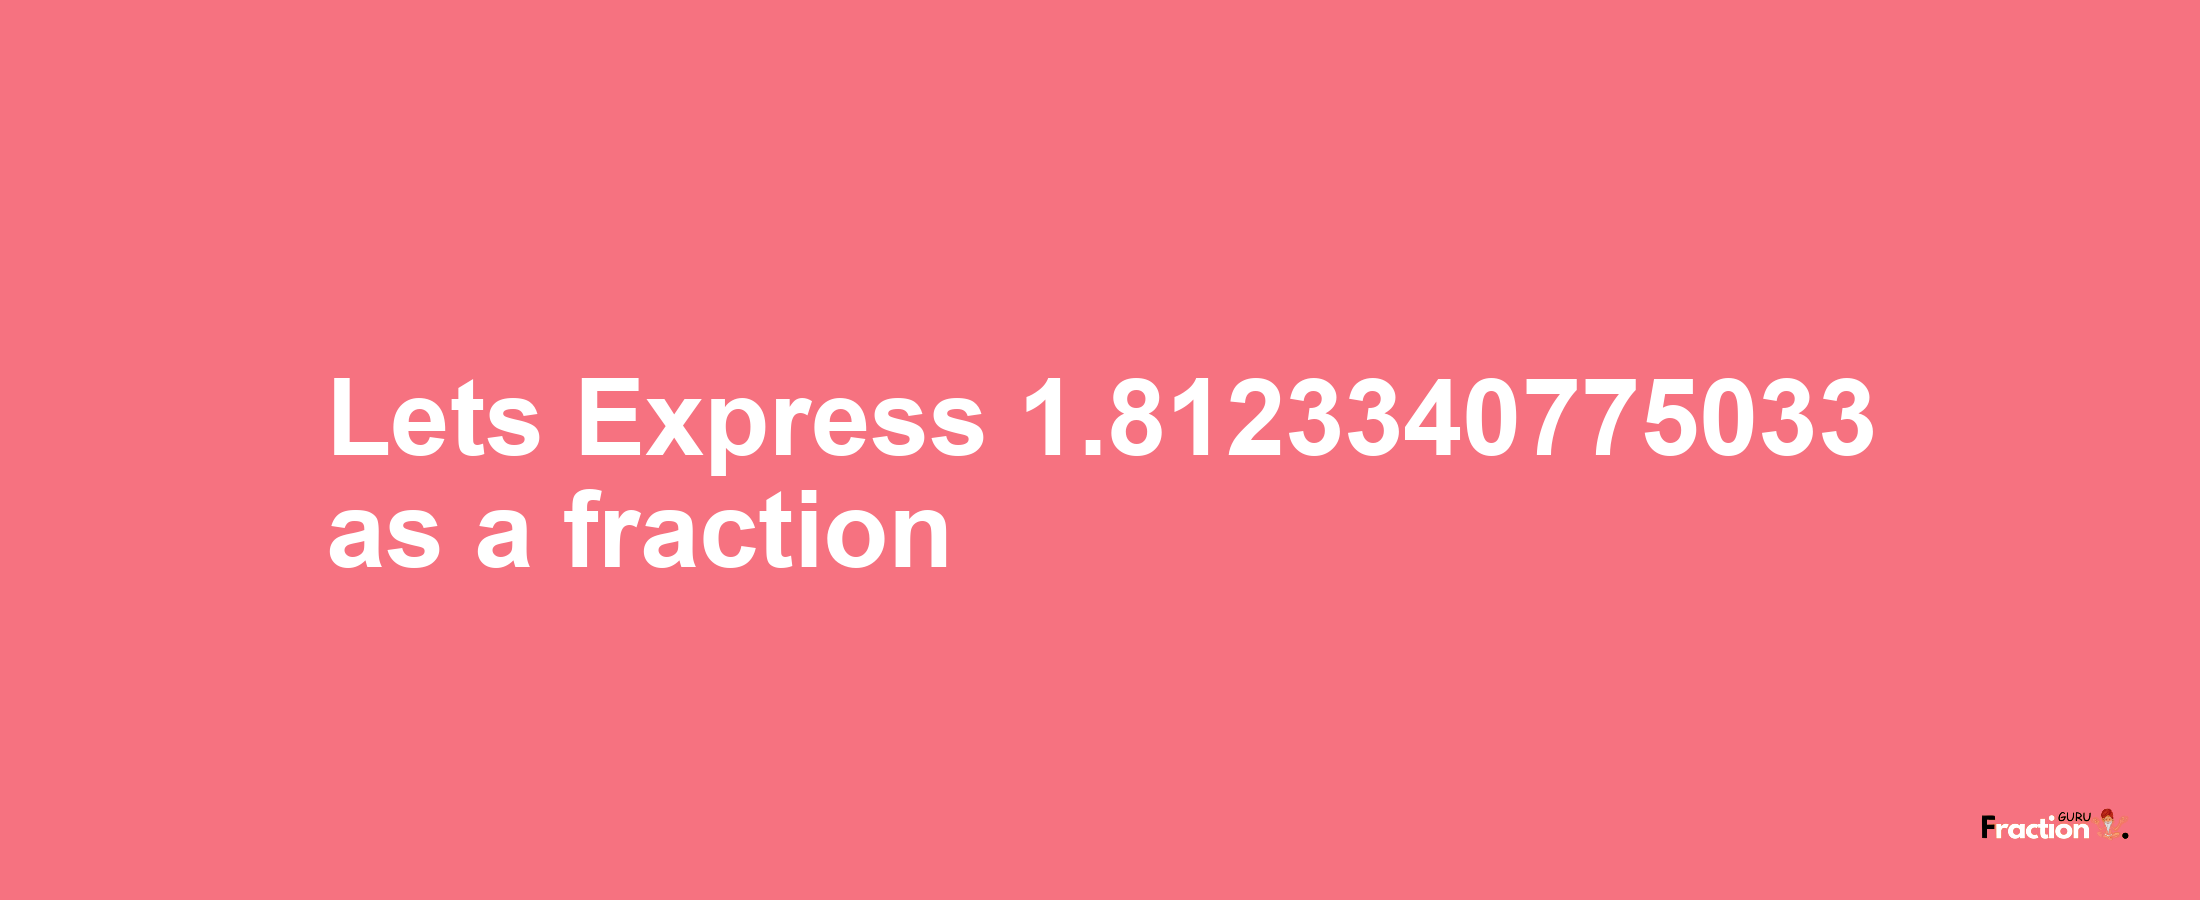 Lets Express 1.8123340775033 as afraction